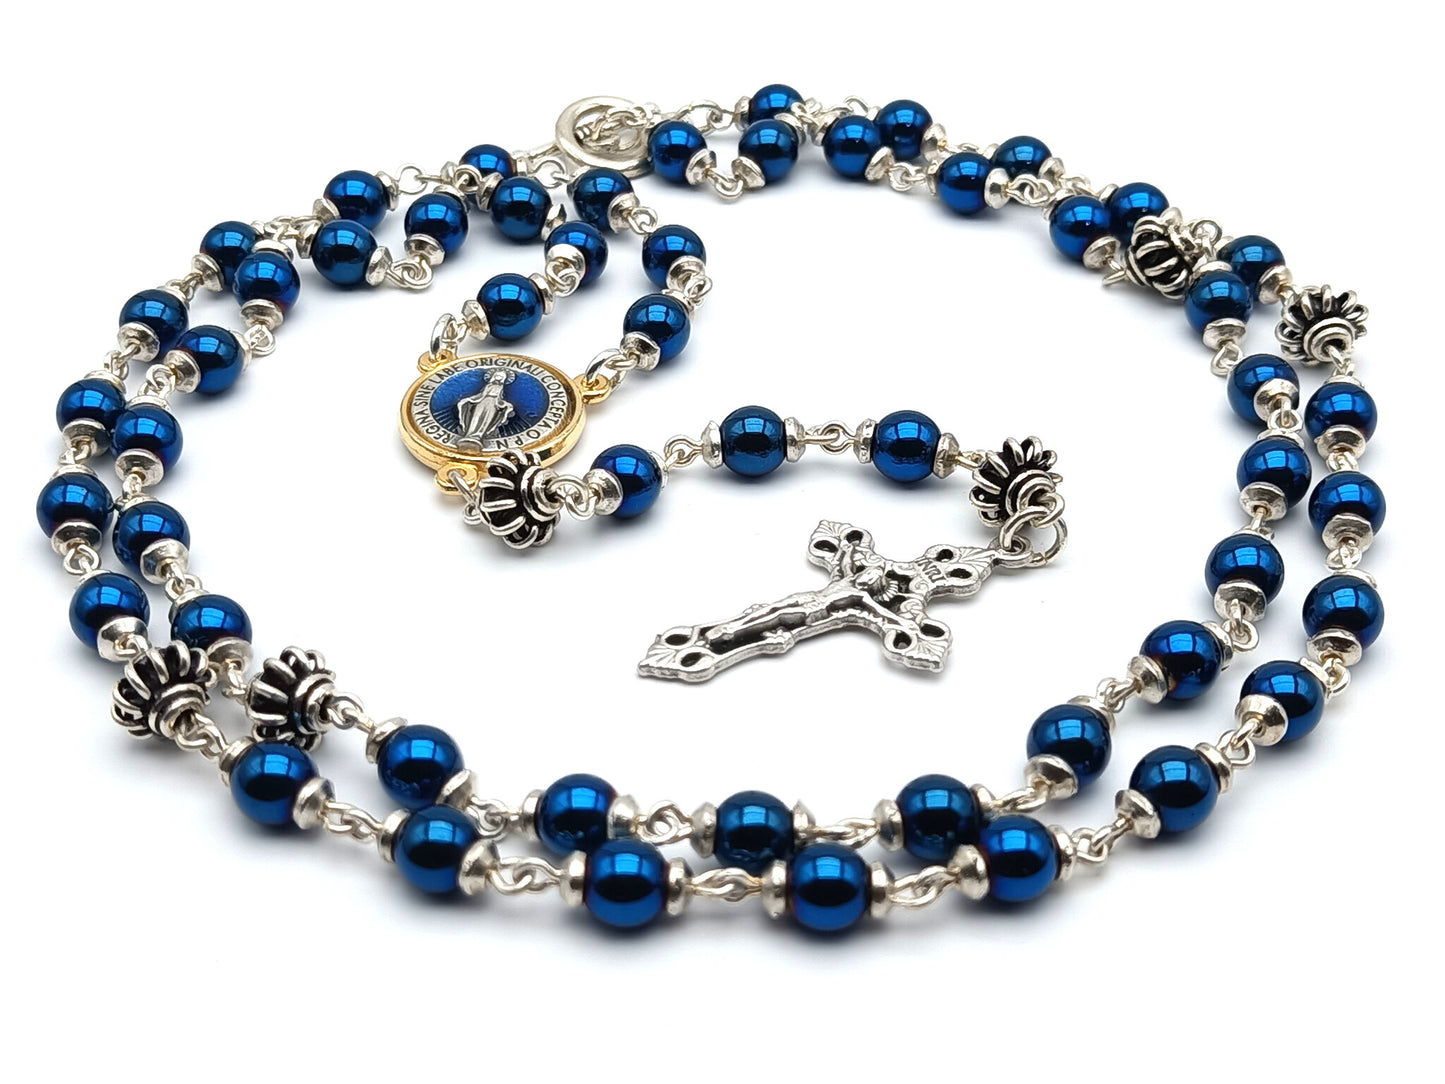 Miraculous medal unique rosary beads with blue hematite gemstone beads, silver crucifix, pater beads, clasp and gold centre medal.